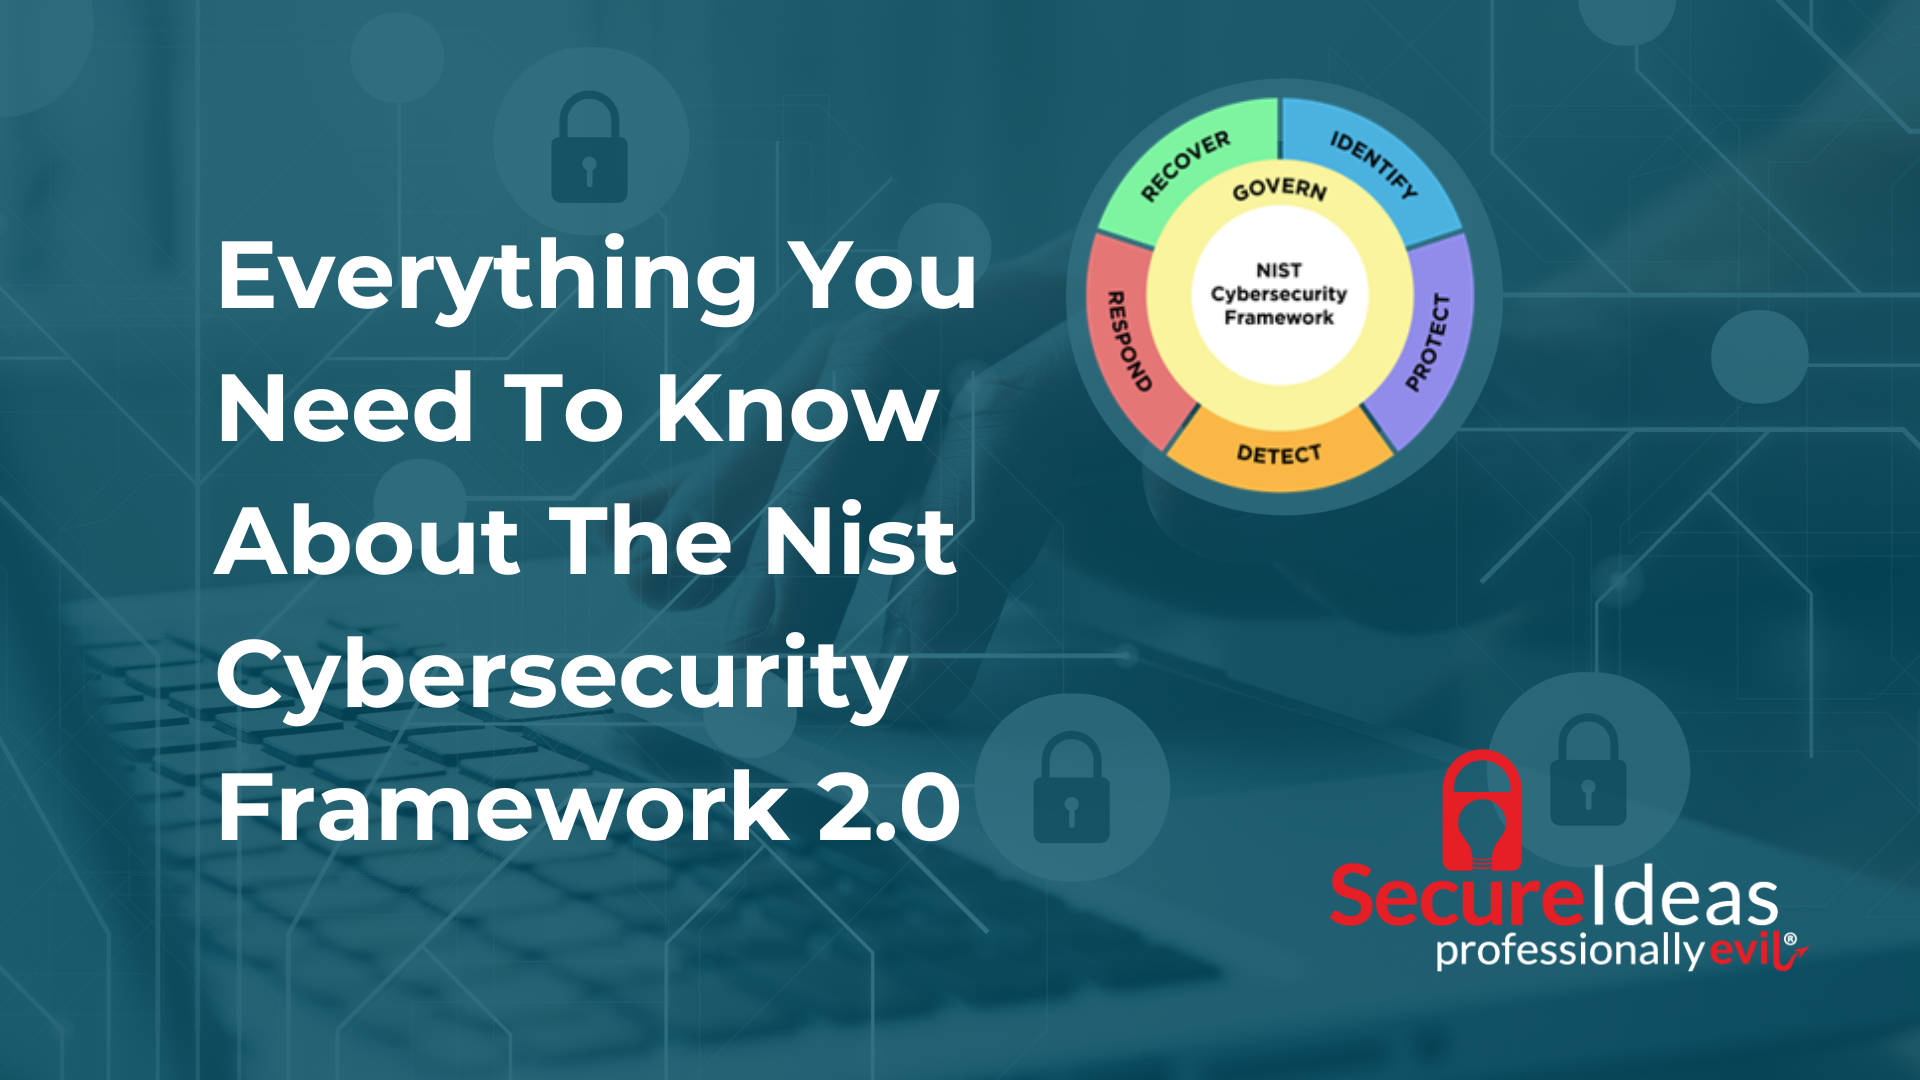 Everything You Need To Know About The Nist Cybersecurity Framework 2.0